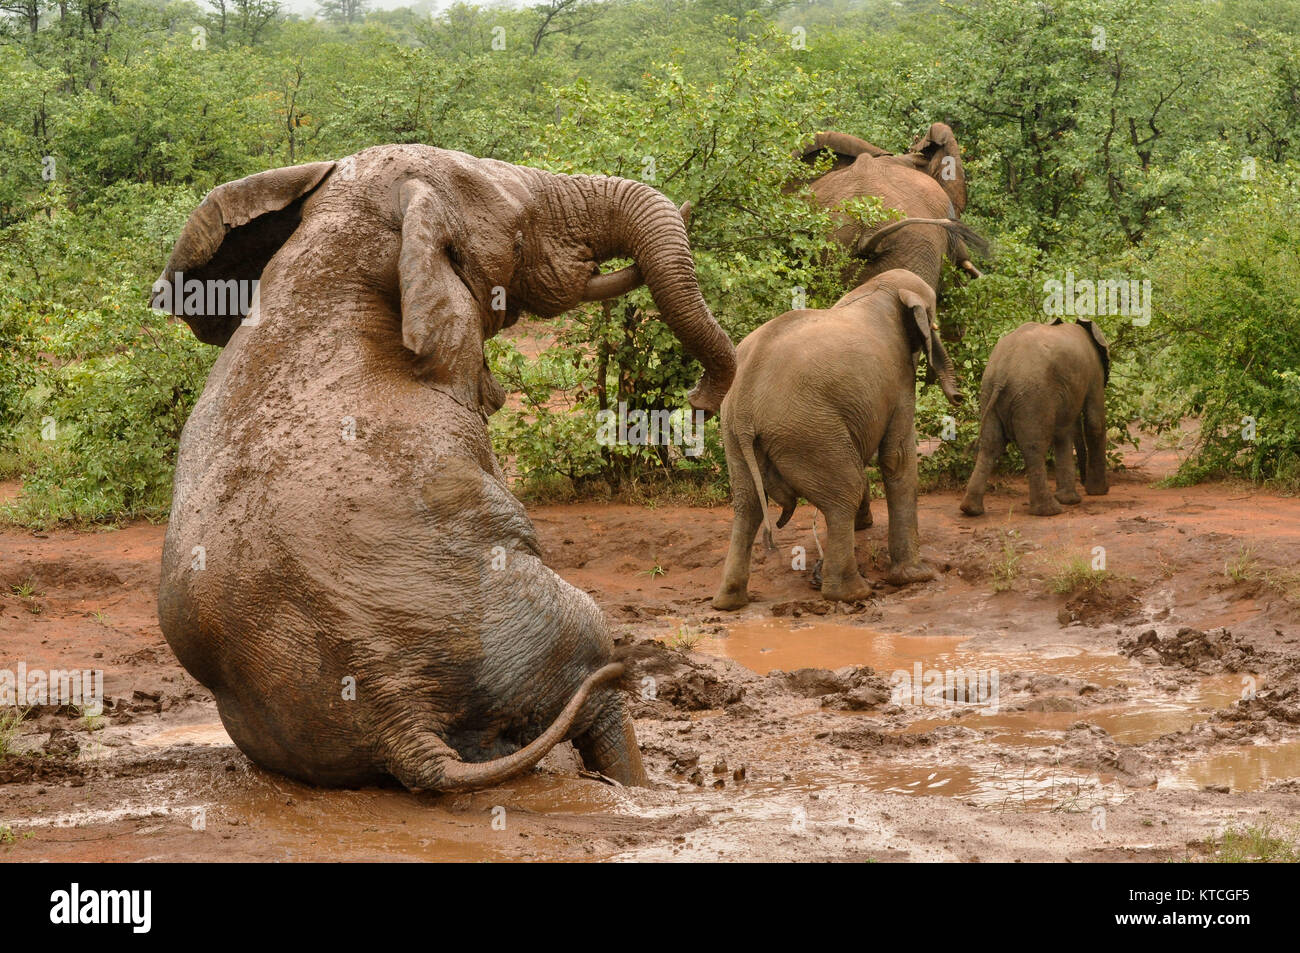 Elephant herd at natural waterhole drinking and scratching bodies in mud Stock Photo